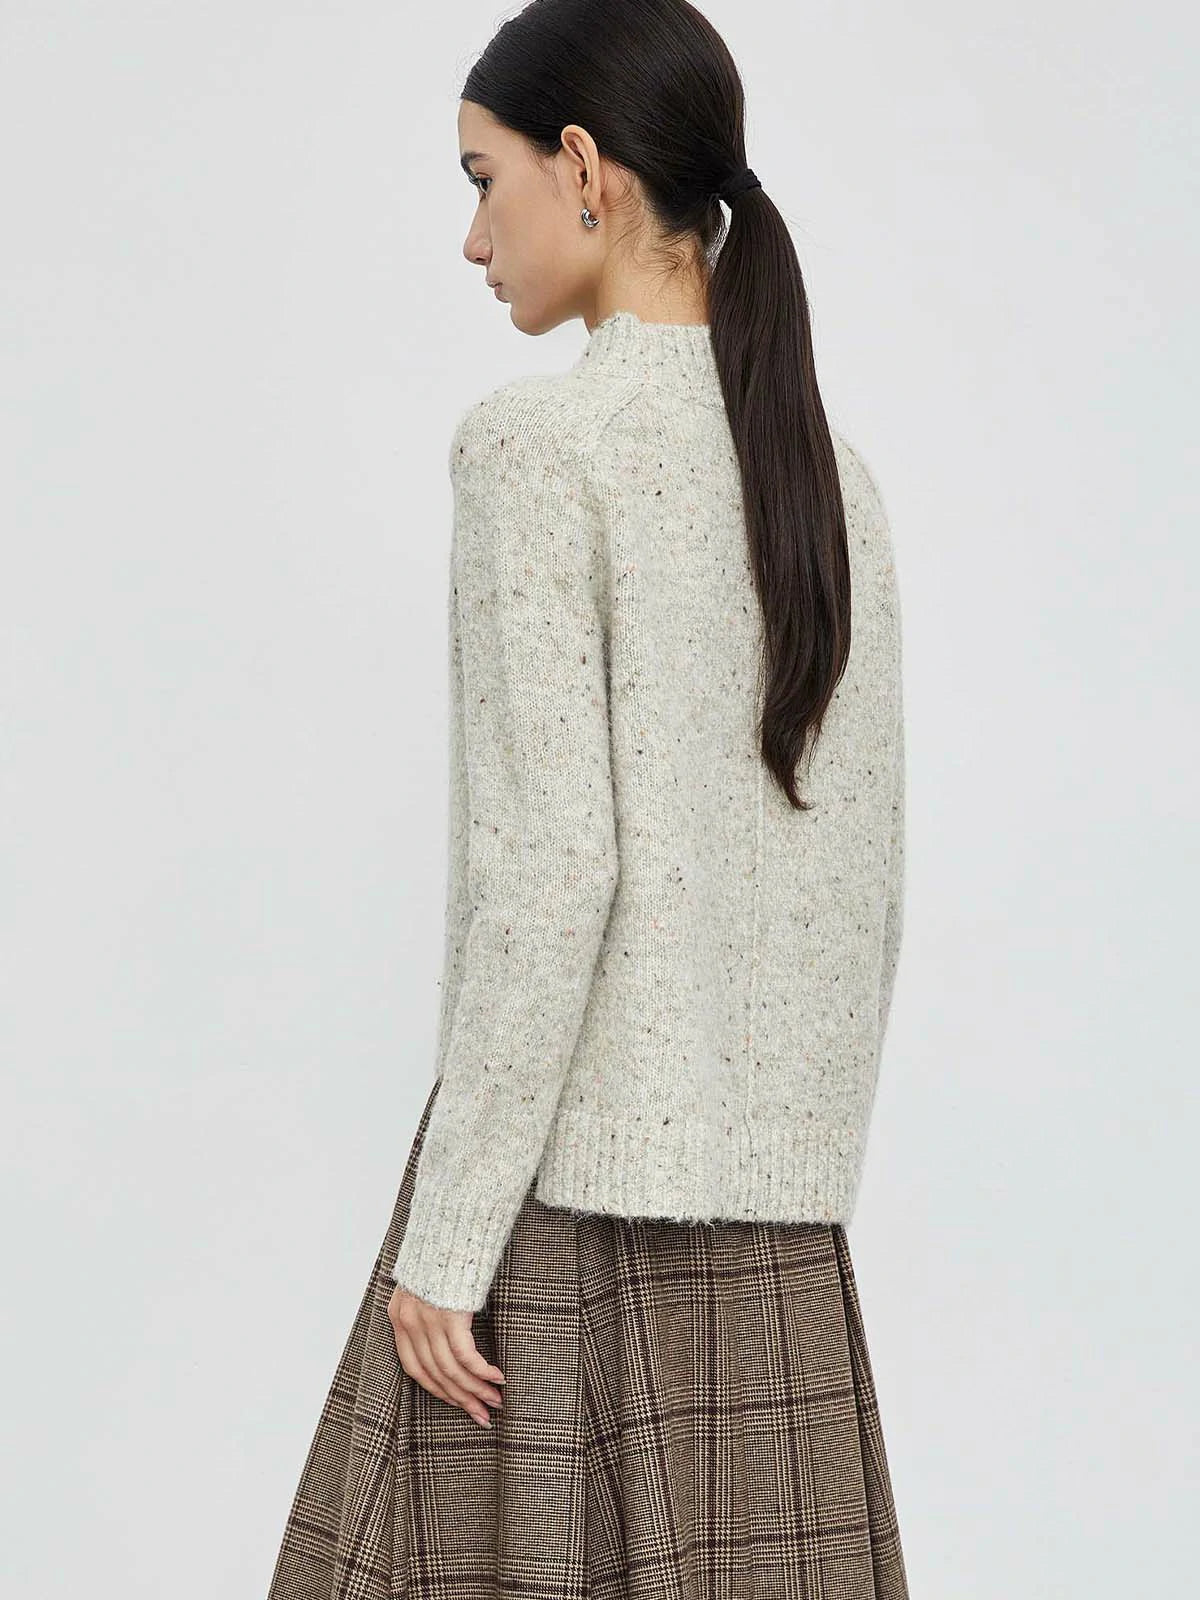 Versatile Ribbed Neck Sweater with Playful Polka Dots